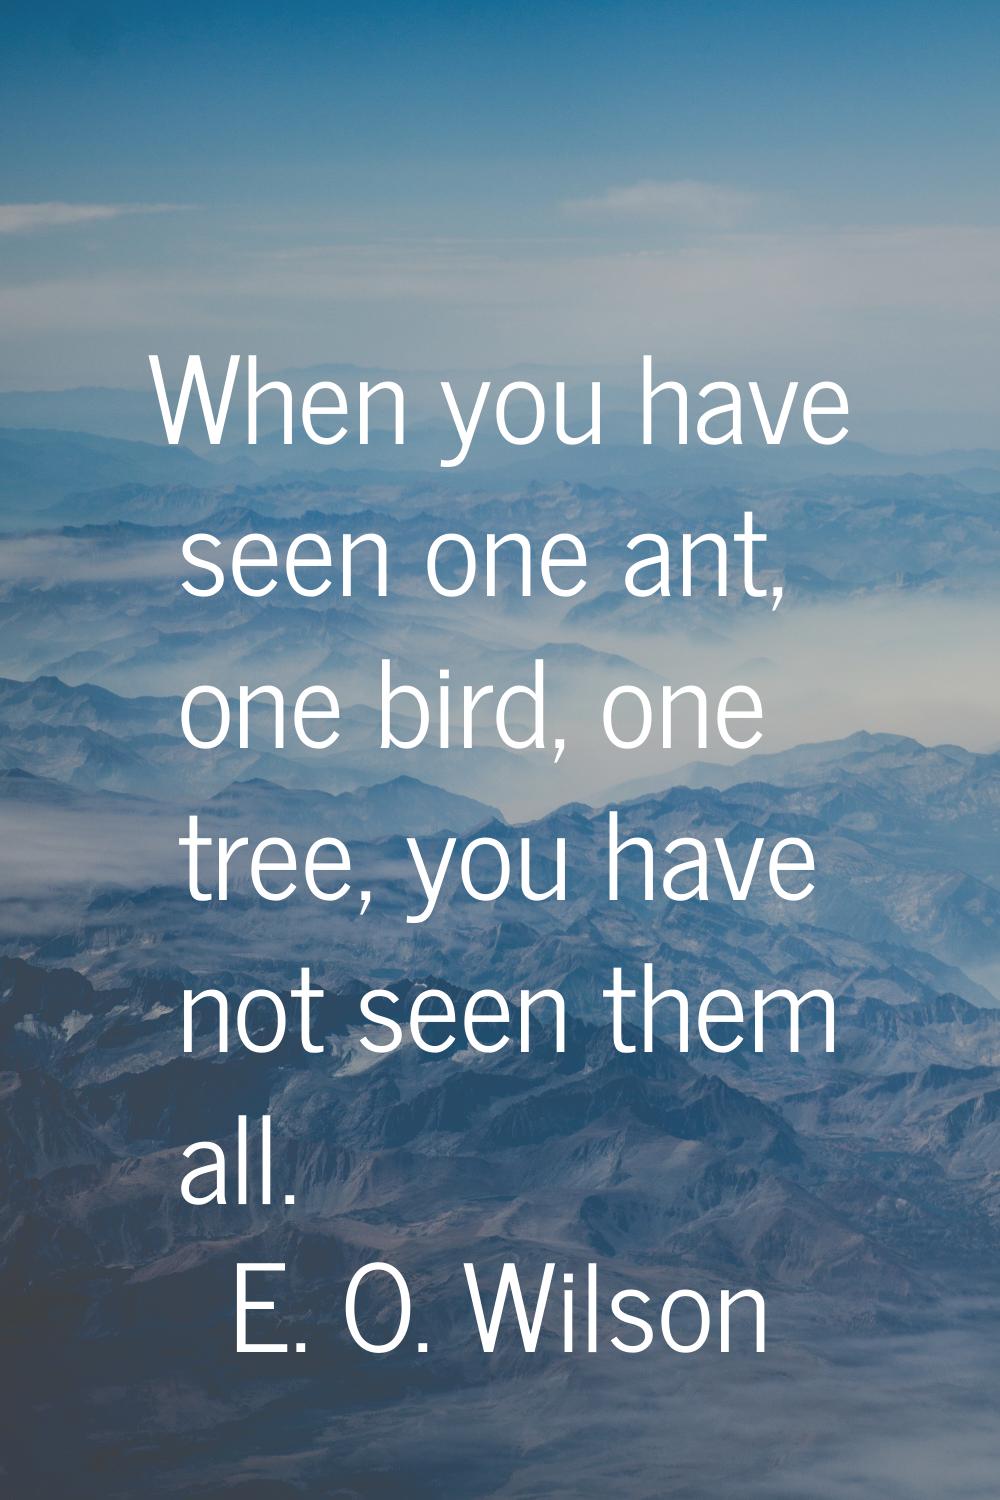 When you have seen one ant, one bird, one tree, you have not seen them all.